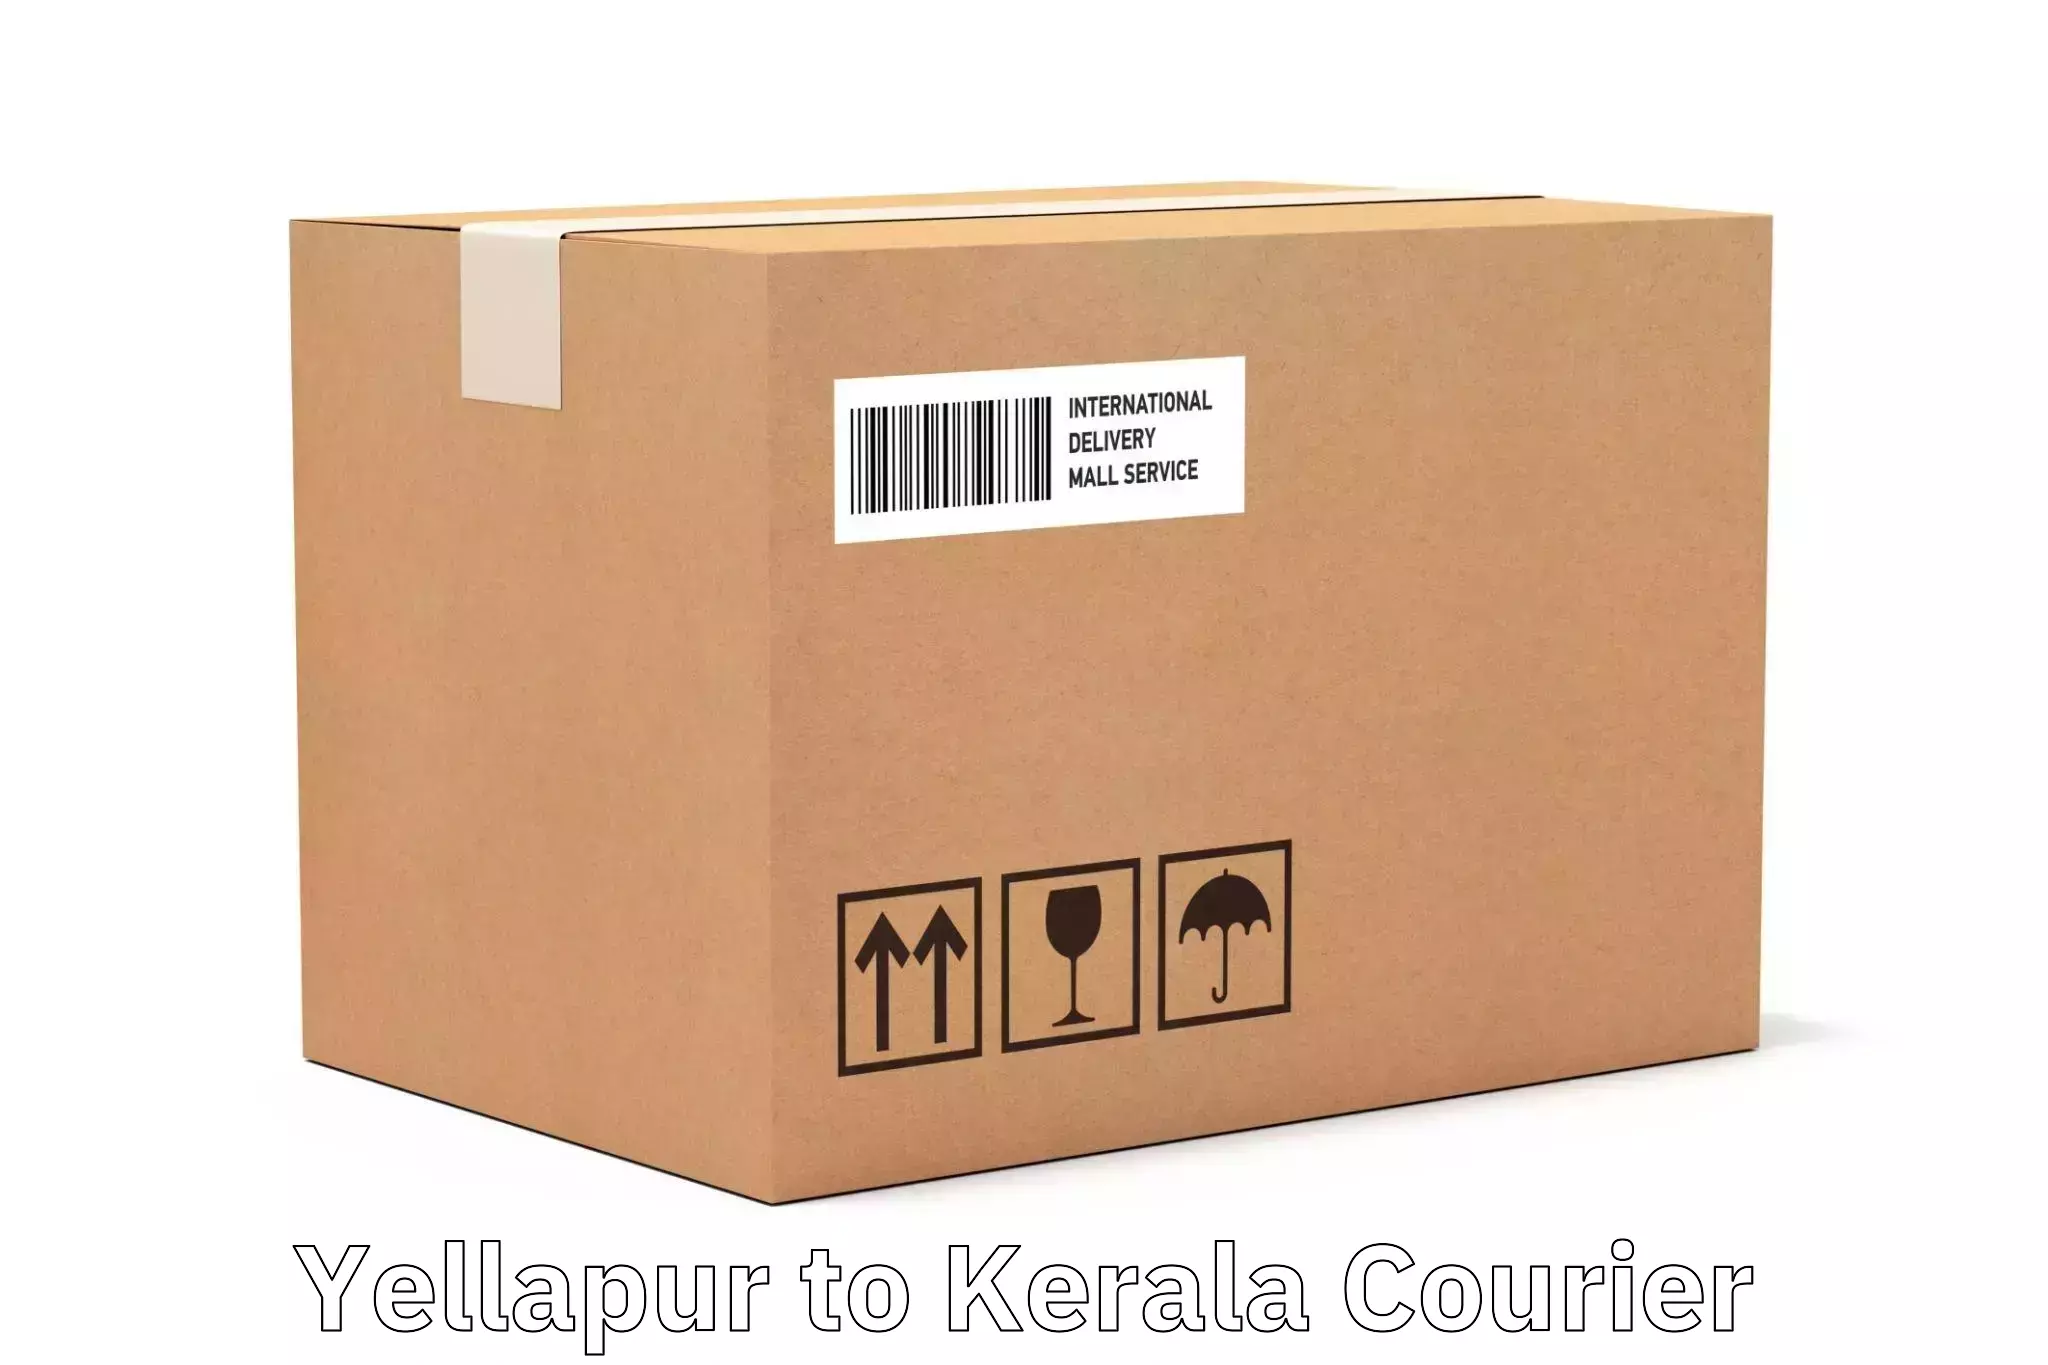 Express delivery network Yellapur to Kerala